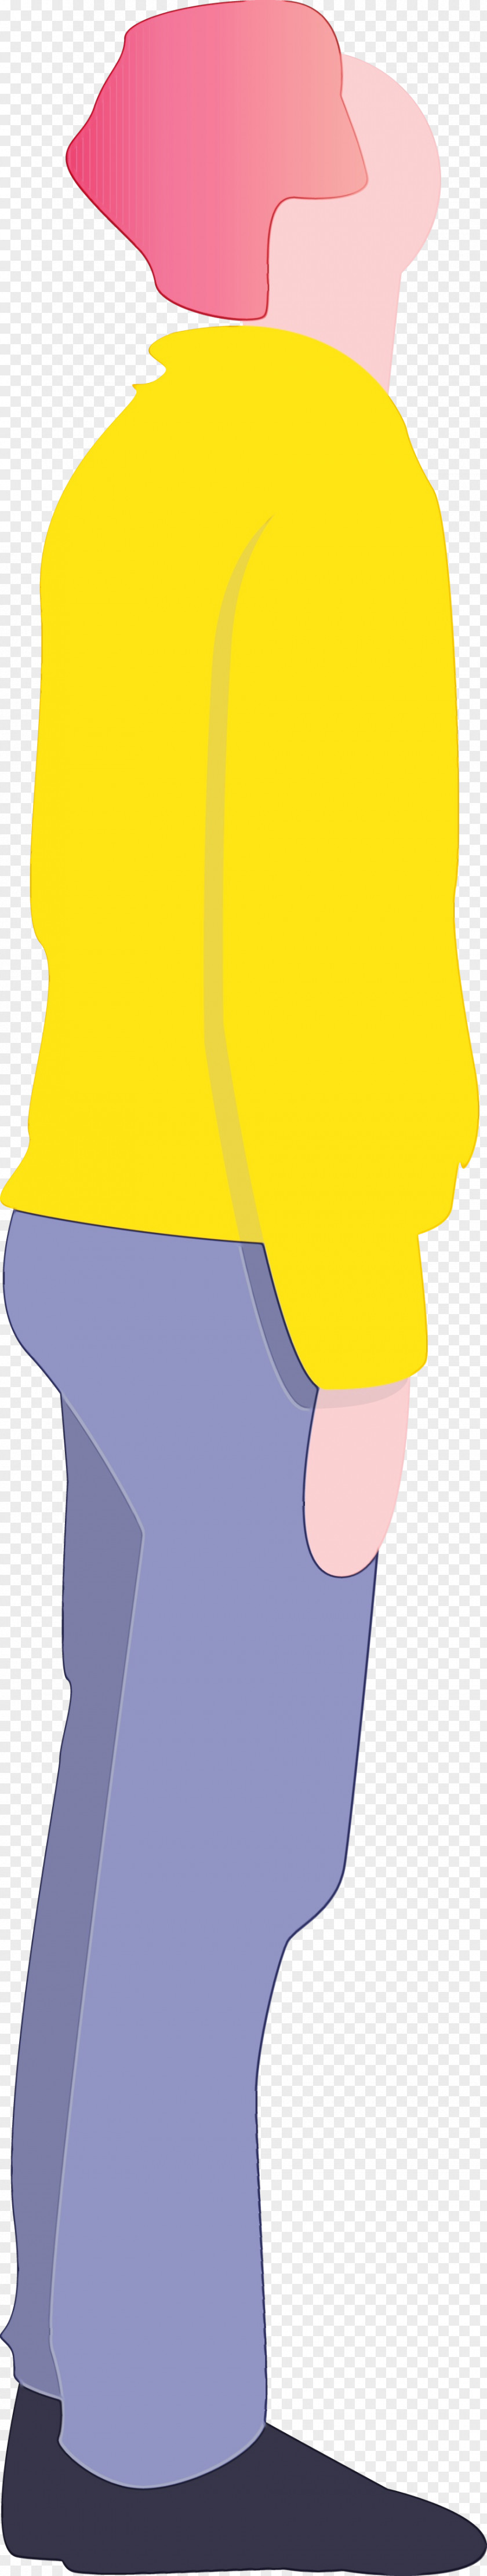 Yellow Clothing Shorts Joint Leggings PNG